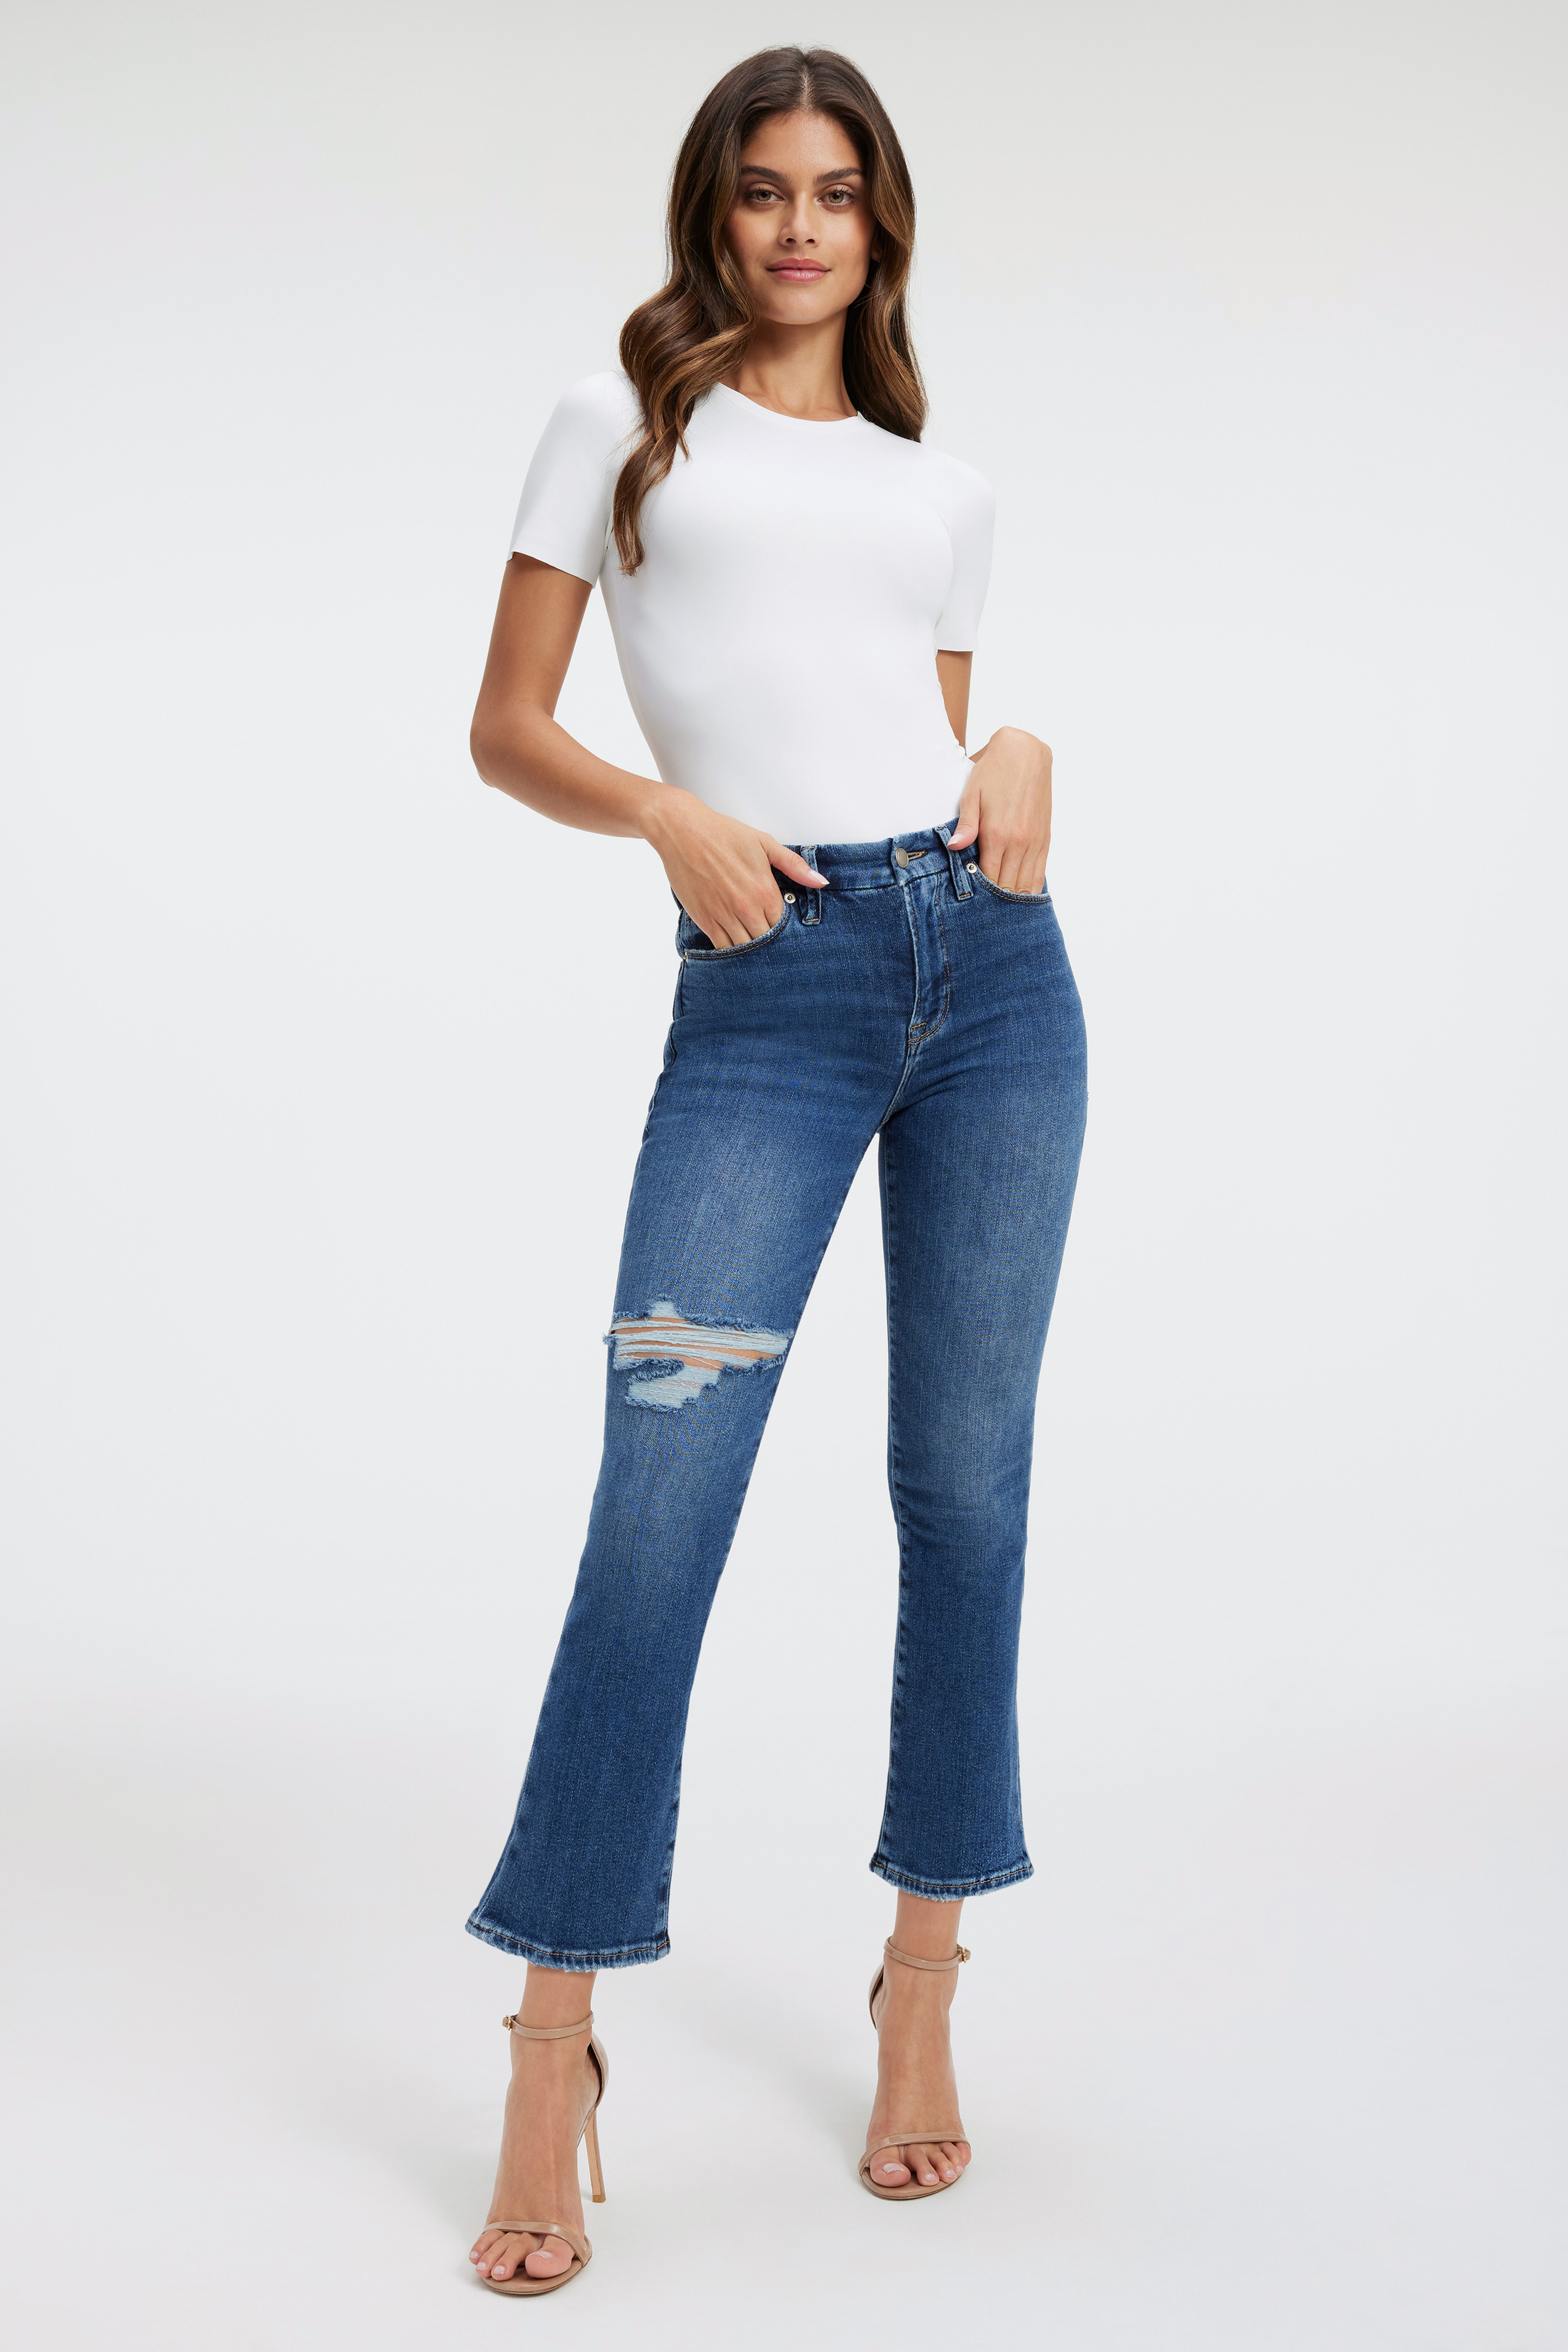 Styled with GOOD LEGS SKINNY CROPPED CASHMERE JEANS | INDIGO379